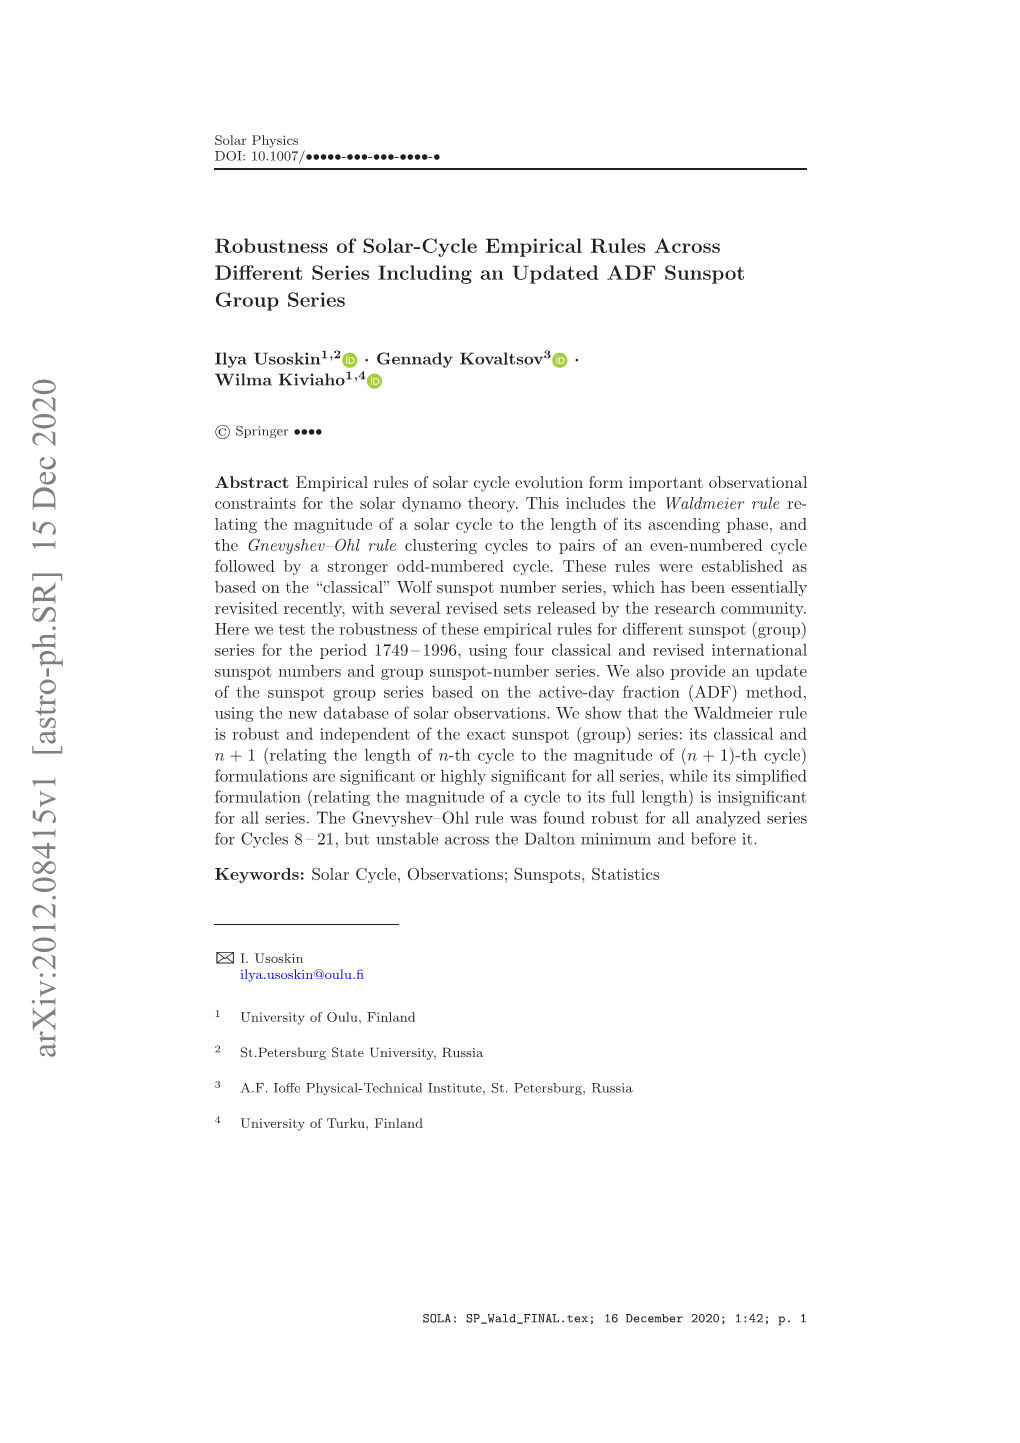 Robustness of Solar-Cycle Empirical Rules Across Different Series